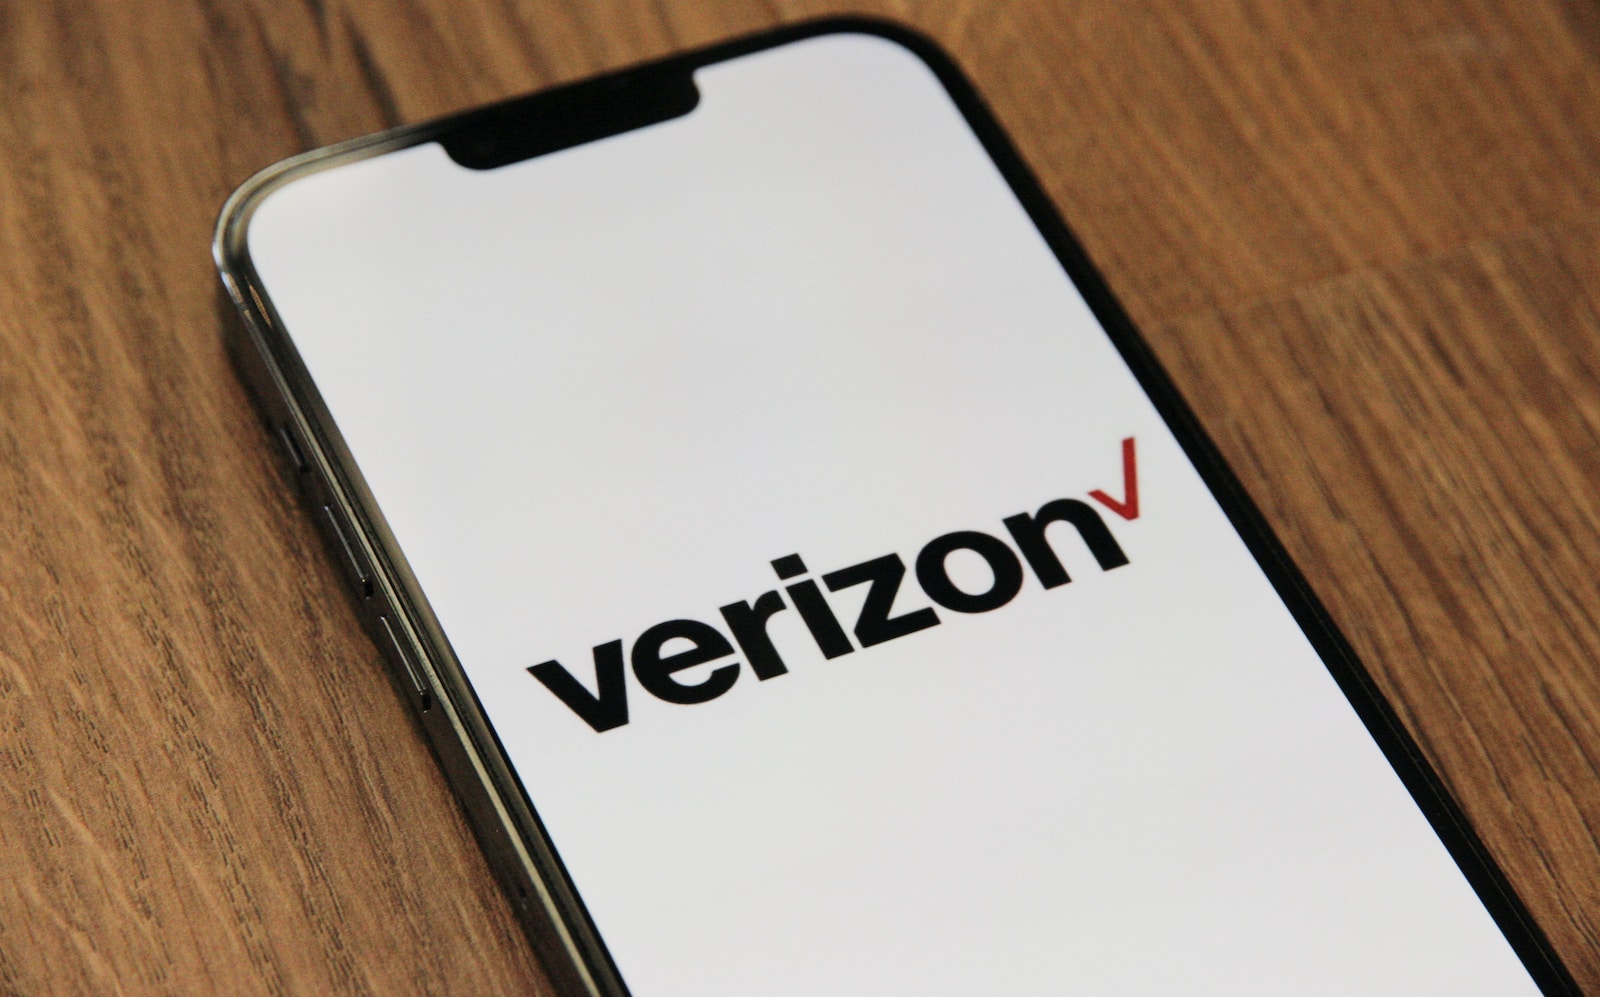 Verizon Class Action Lawsuit Could You Be Eligible for a 100